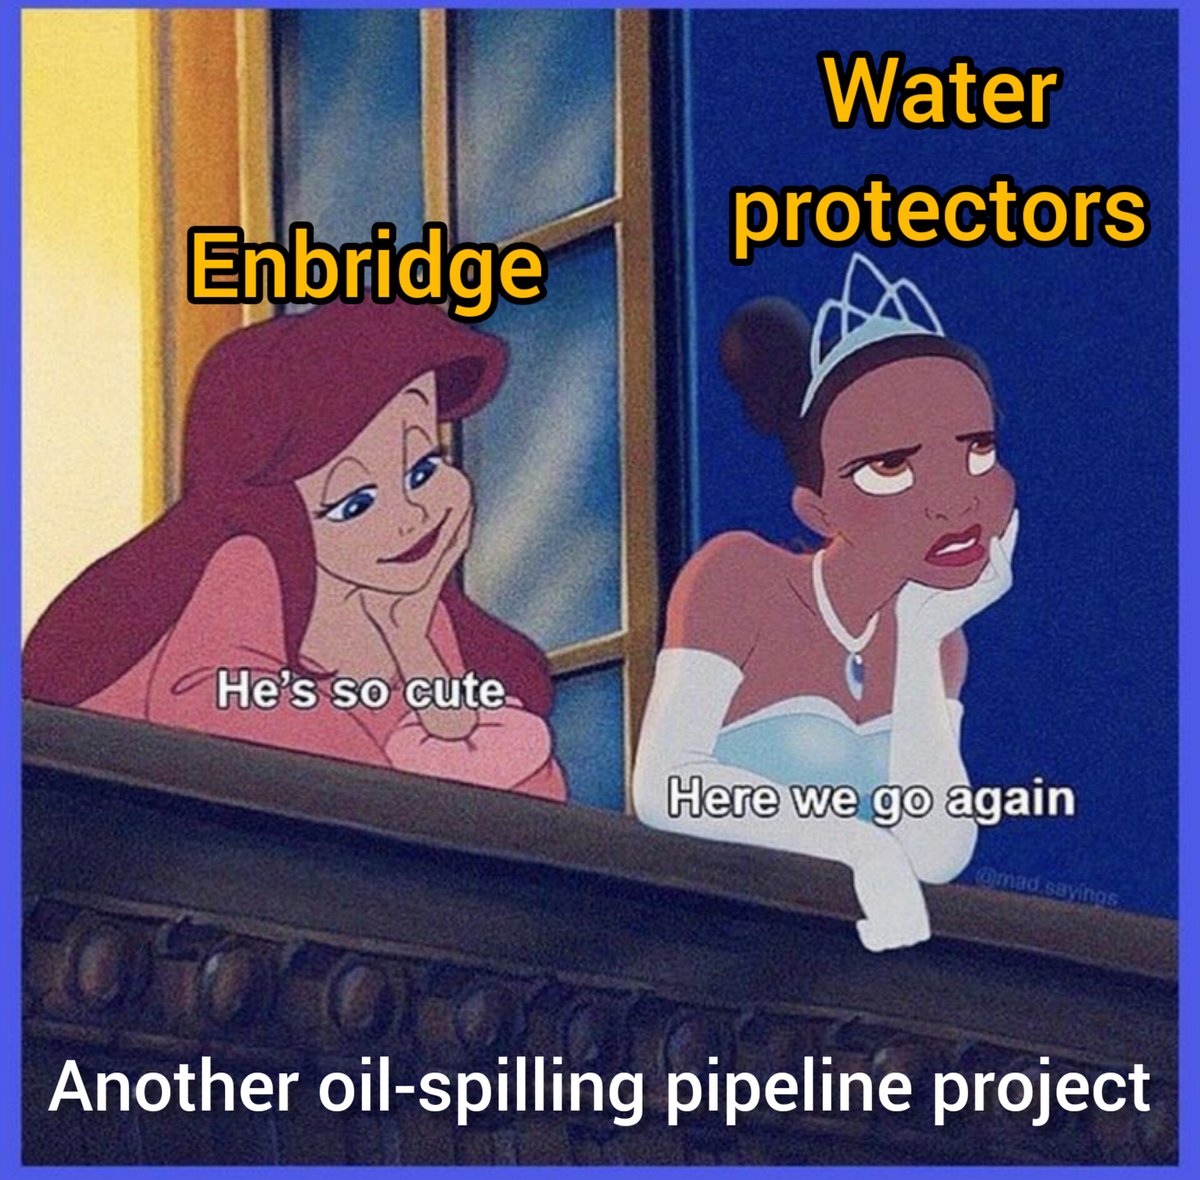 Avatar: The Last Airbender fans worked to #StopLine3, and now, we're mobilizing Disney fans to #ProtectArielsHome and #StopLine5.

Enbridge's pipelines threaten the Great Lakes and nearby Indigenous nations.

Take action: bit.ly/ariel_actions